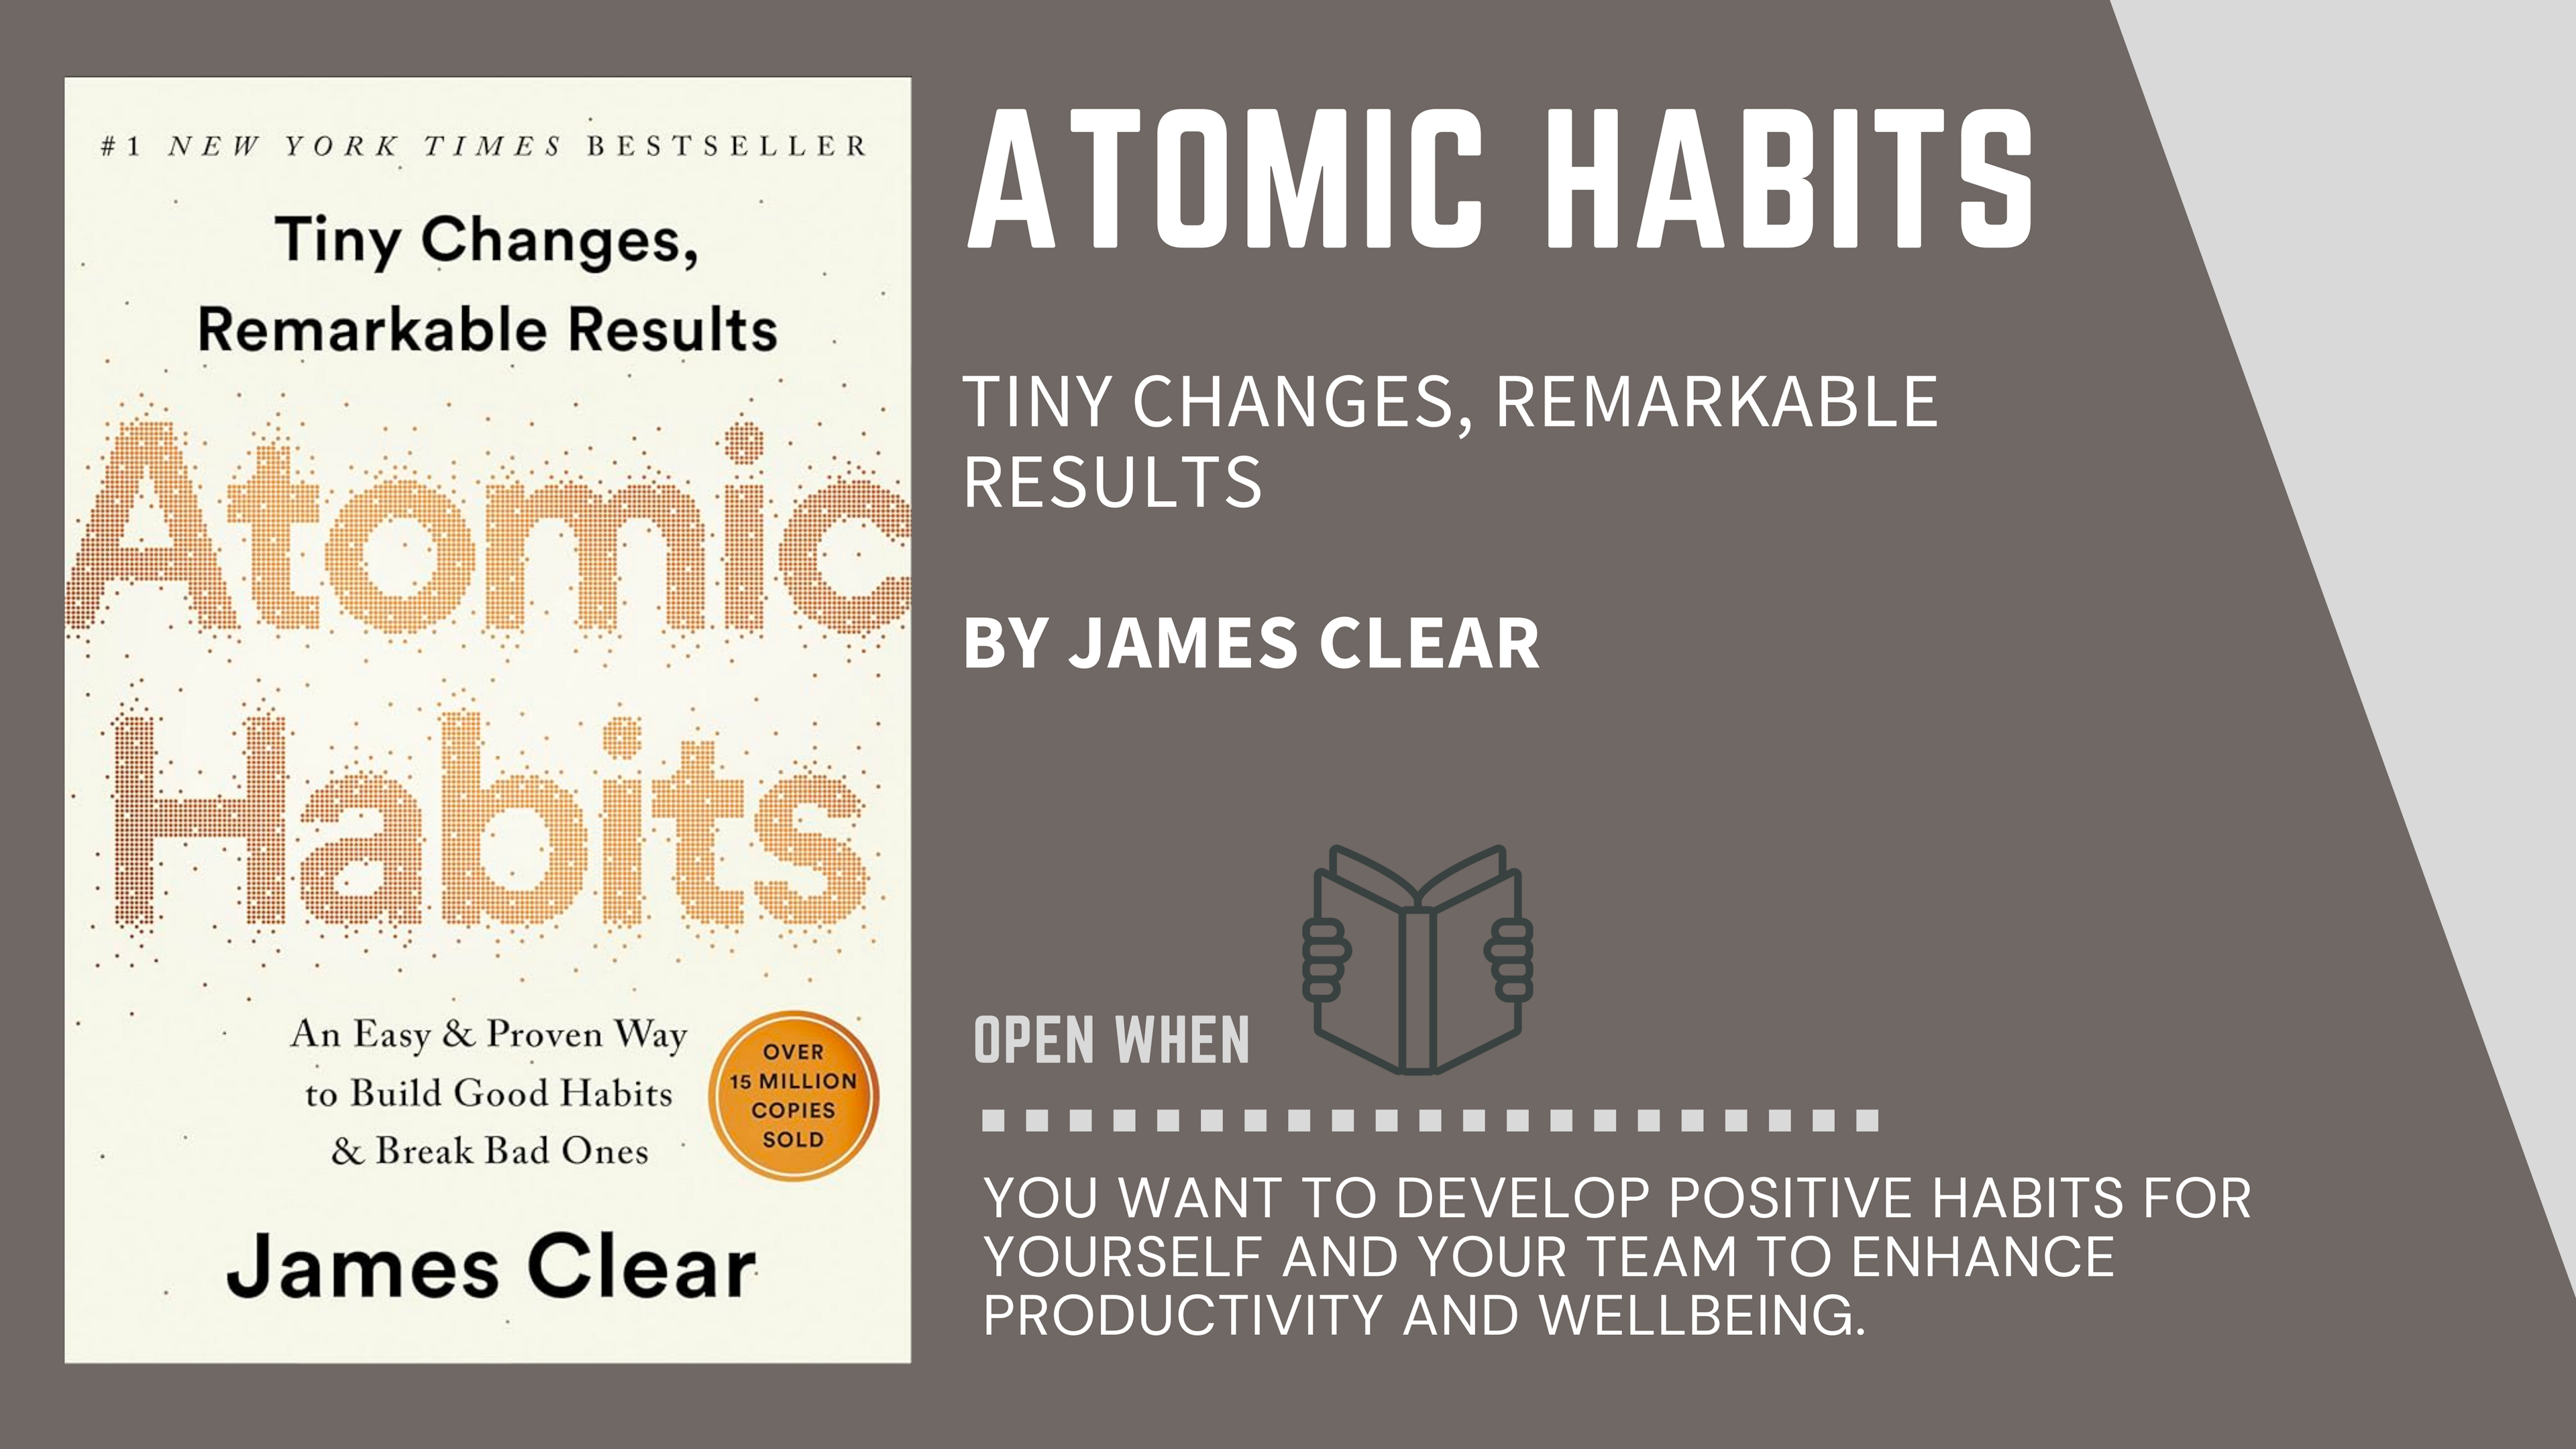 Book Cover of "Atomic Habits" by James Clear